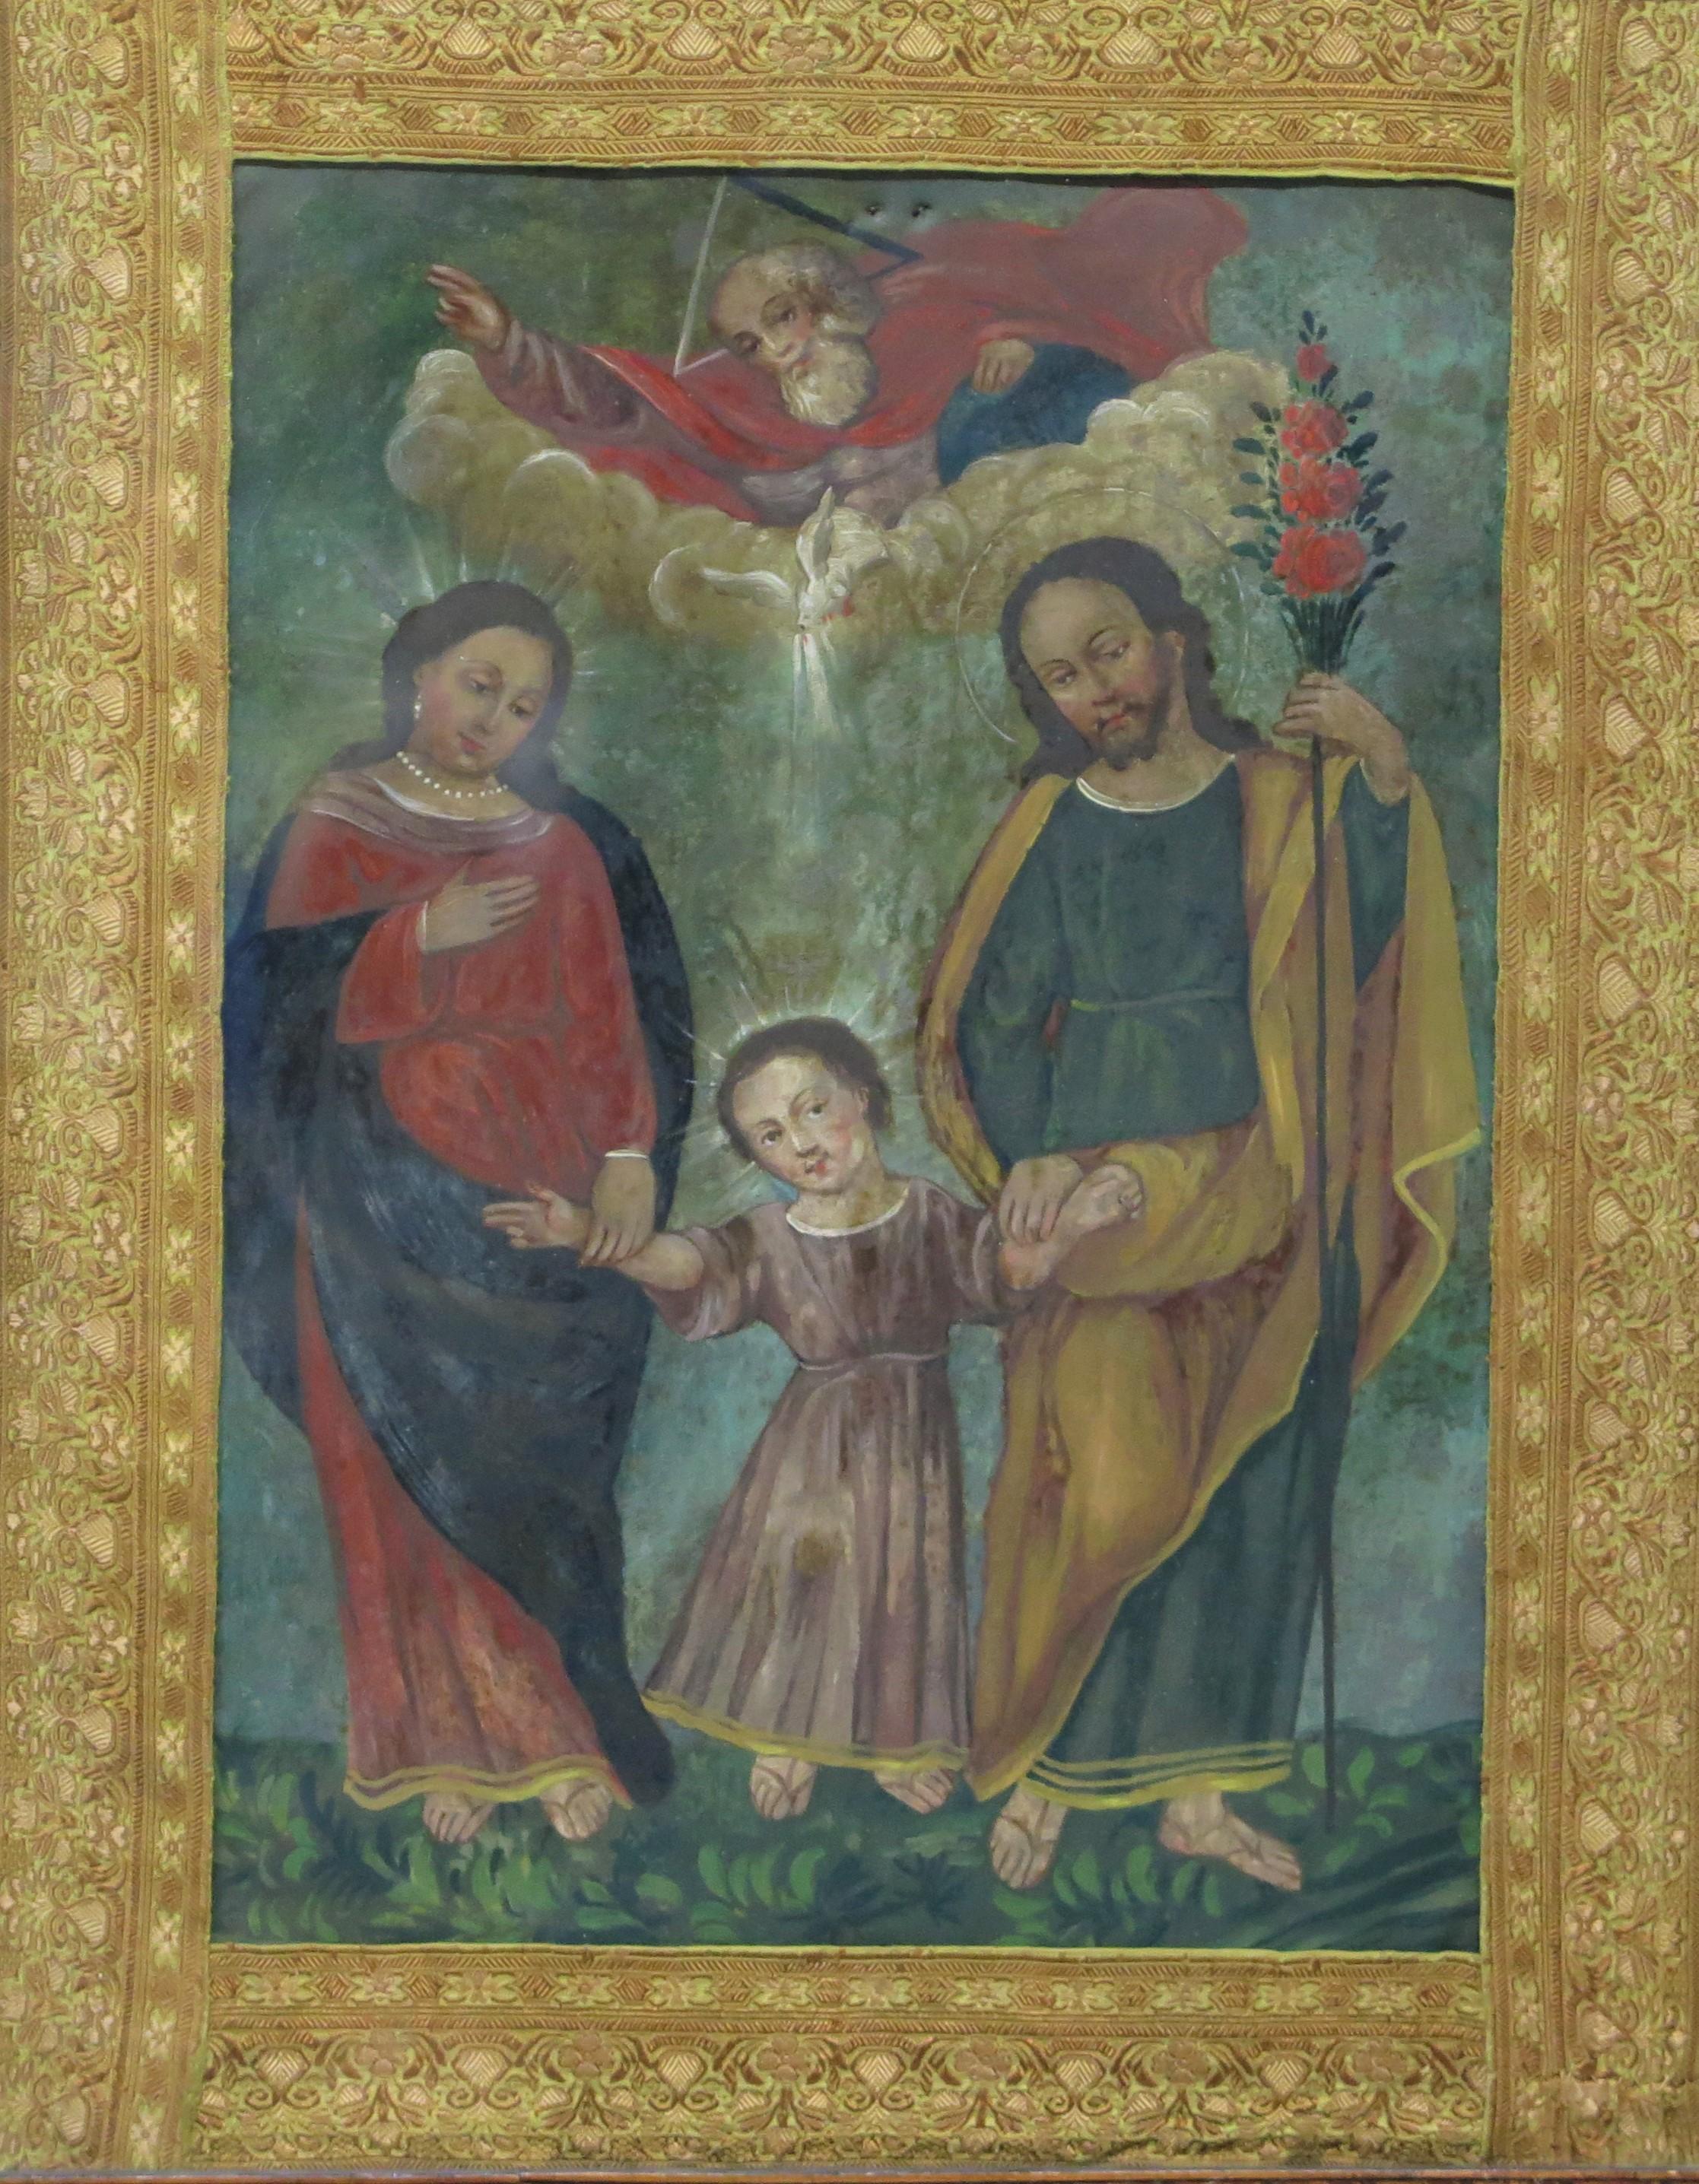 Spanish Colonial / Mexican Holy Family oil on tin retablo depicting the Holy Family, featuring Jesus (the Christ child), Mary, and Joseph with a dove flying overhead that symbolizes the Holy Spirit. Mary and Joseph holds Jesus' hands as they walk